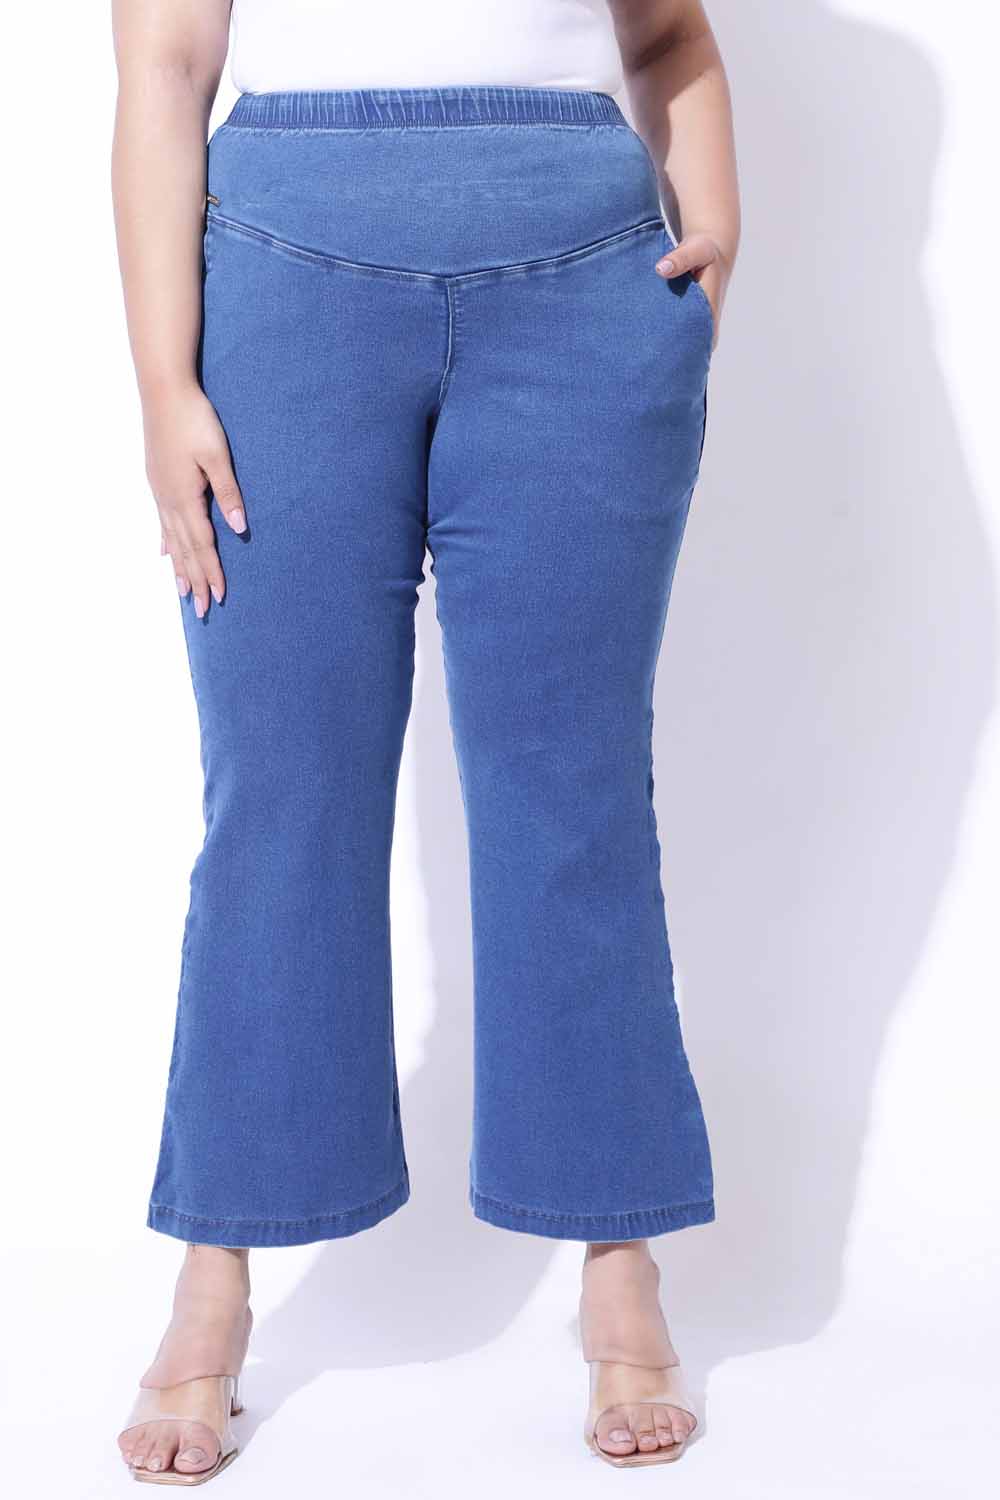 Curve Appeal Jeans Womens Plus Size Elastic Waist High Stretch